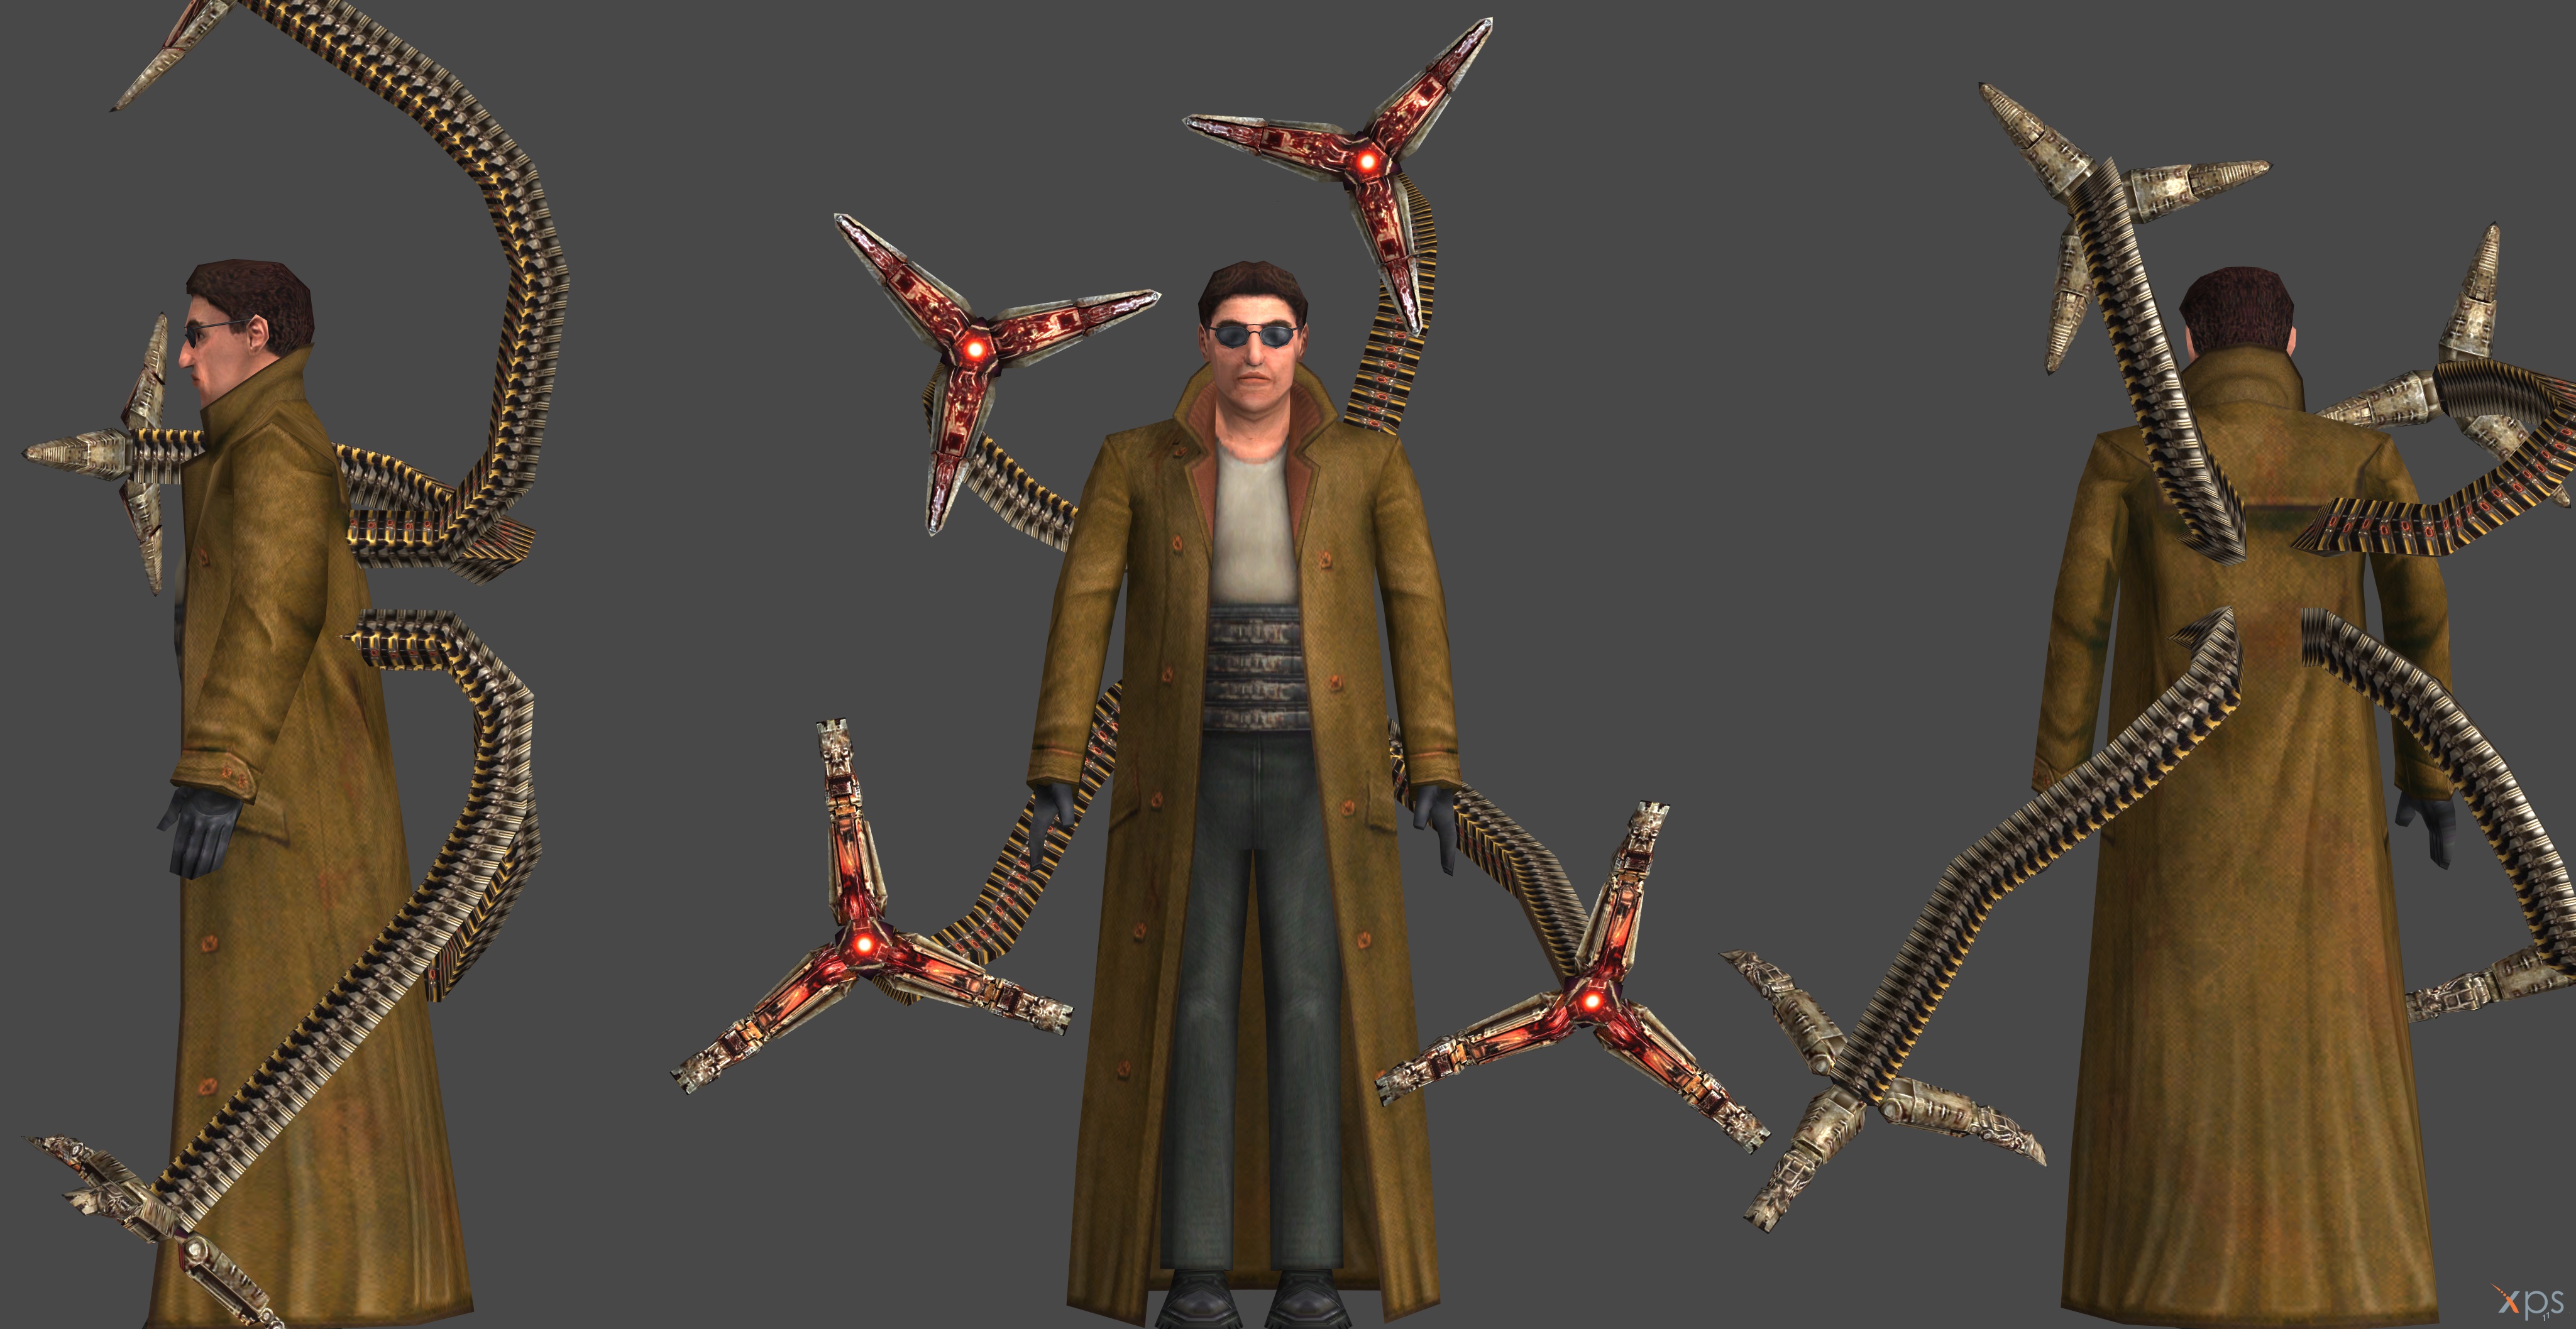 Otto Octavius/Doctor Octopus: NWH PNG by IWasBoredSoIDidThis on DeviantArt